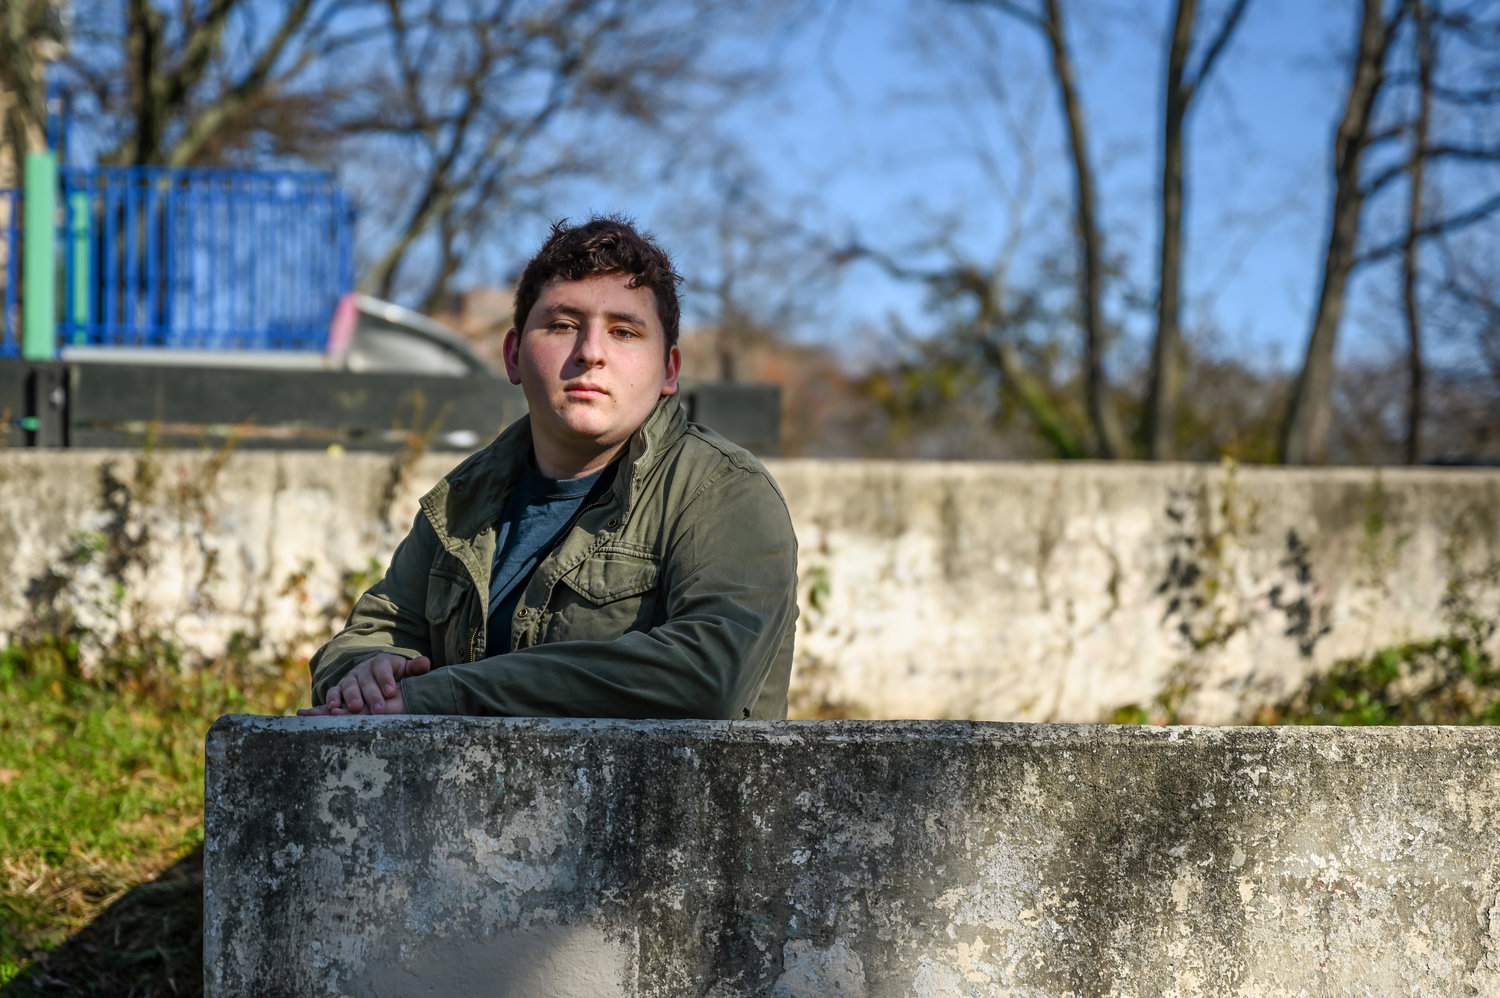 Raphy Jacobson’s senior year at the High School of American Studies isn’t shaping up the way he expected thanks to the coronavirus pandemic. He and his classmates will return to the building next week. But at this point, Jacobson has his sights set on college.